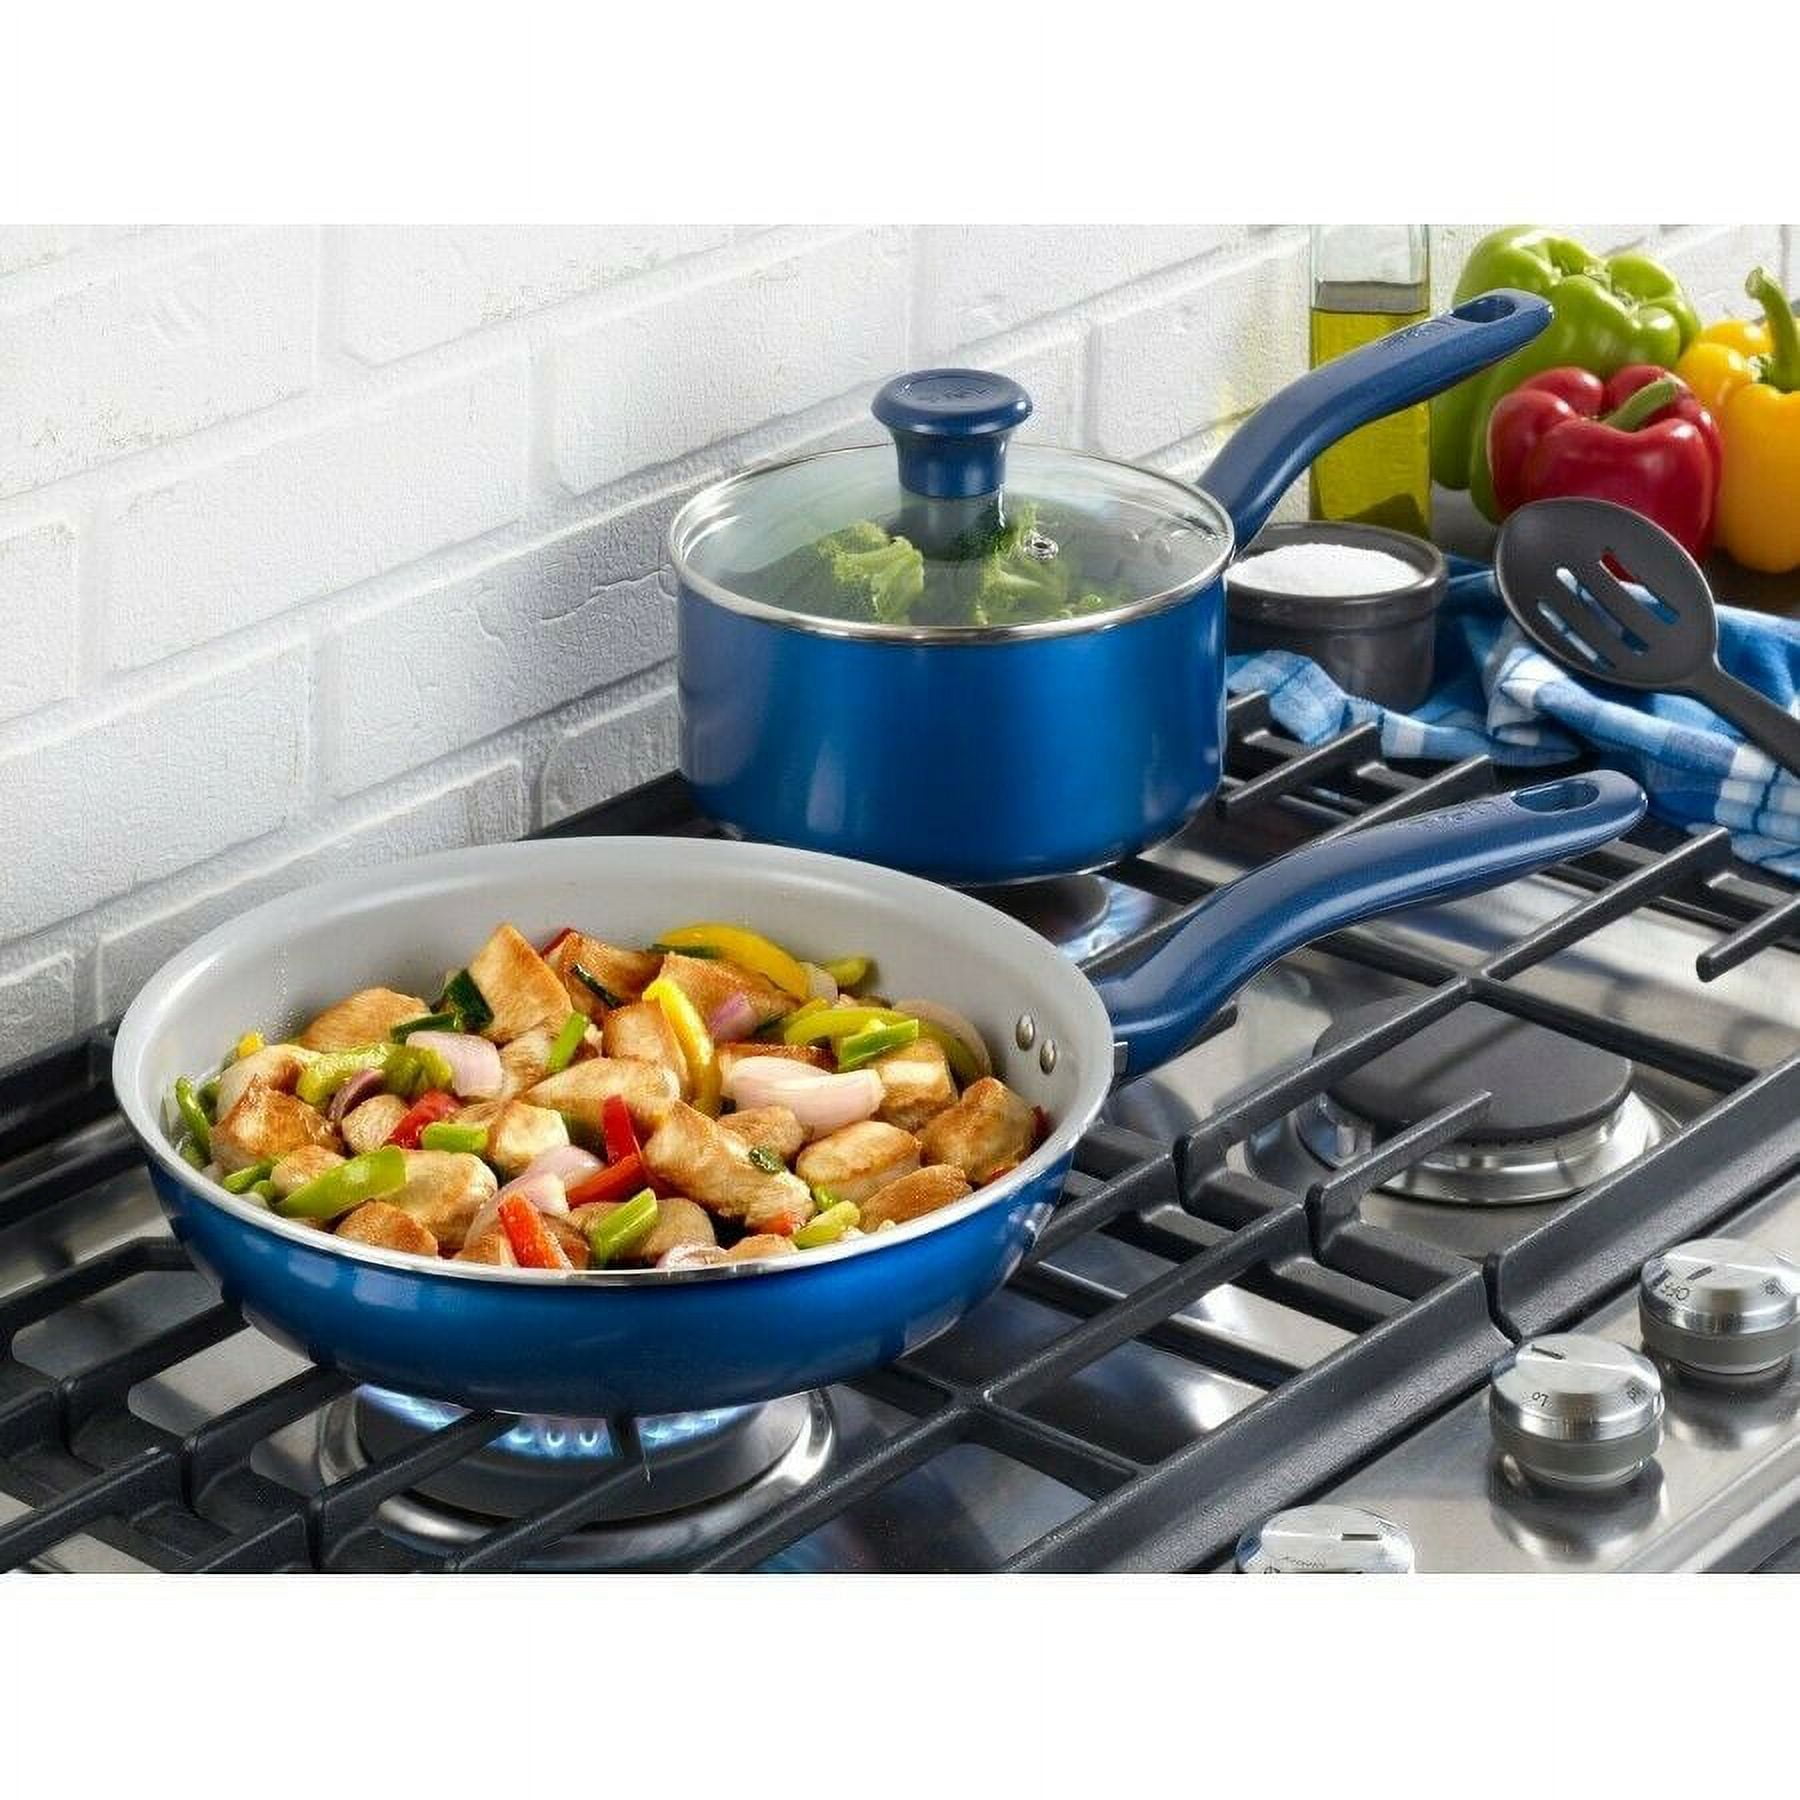 Nonstick Cookware: T-fal Simply Cook 12pc Ceramic Recycled